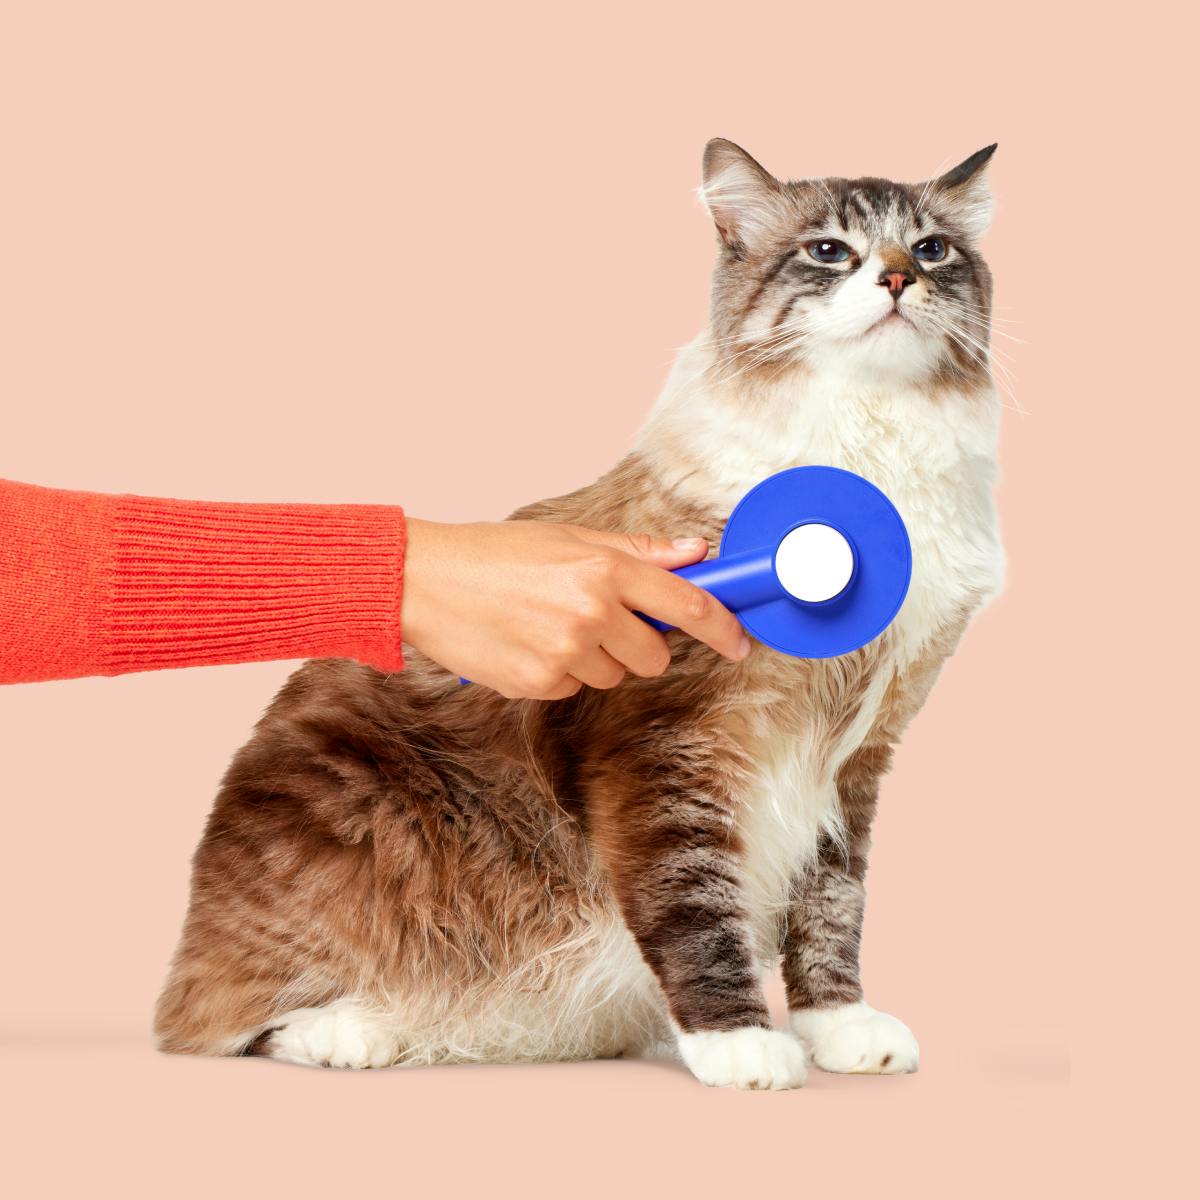 A pretty cat getting brushed by a person